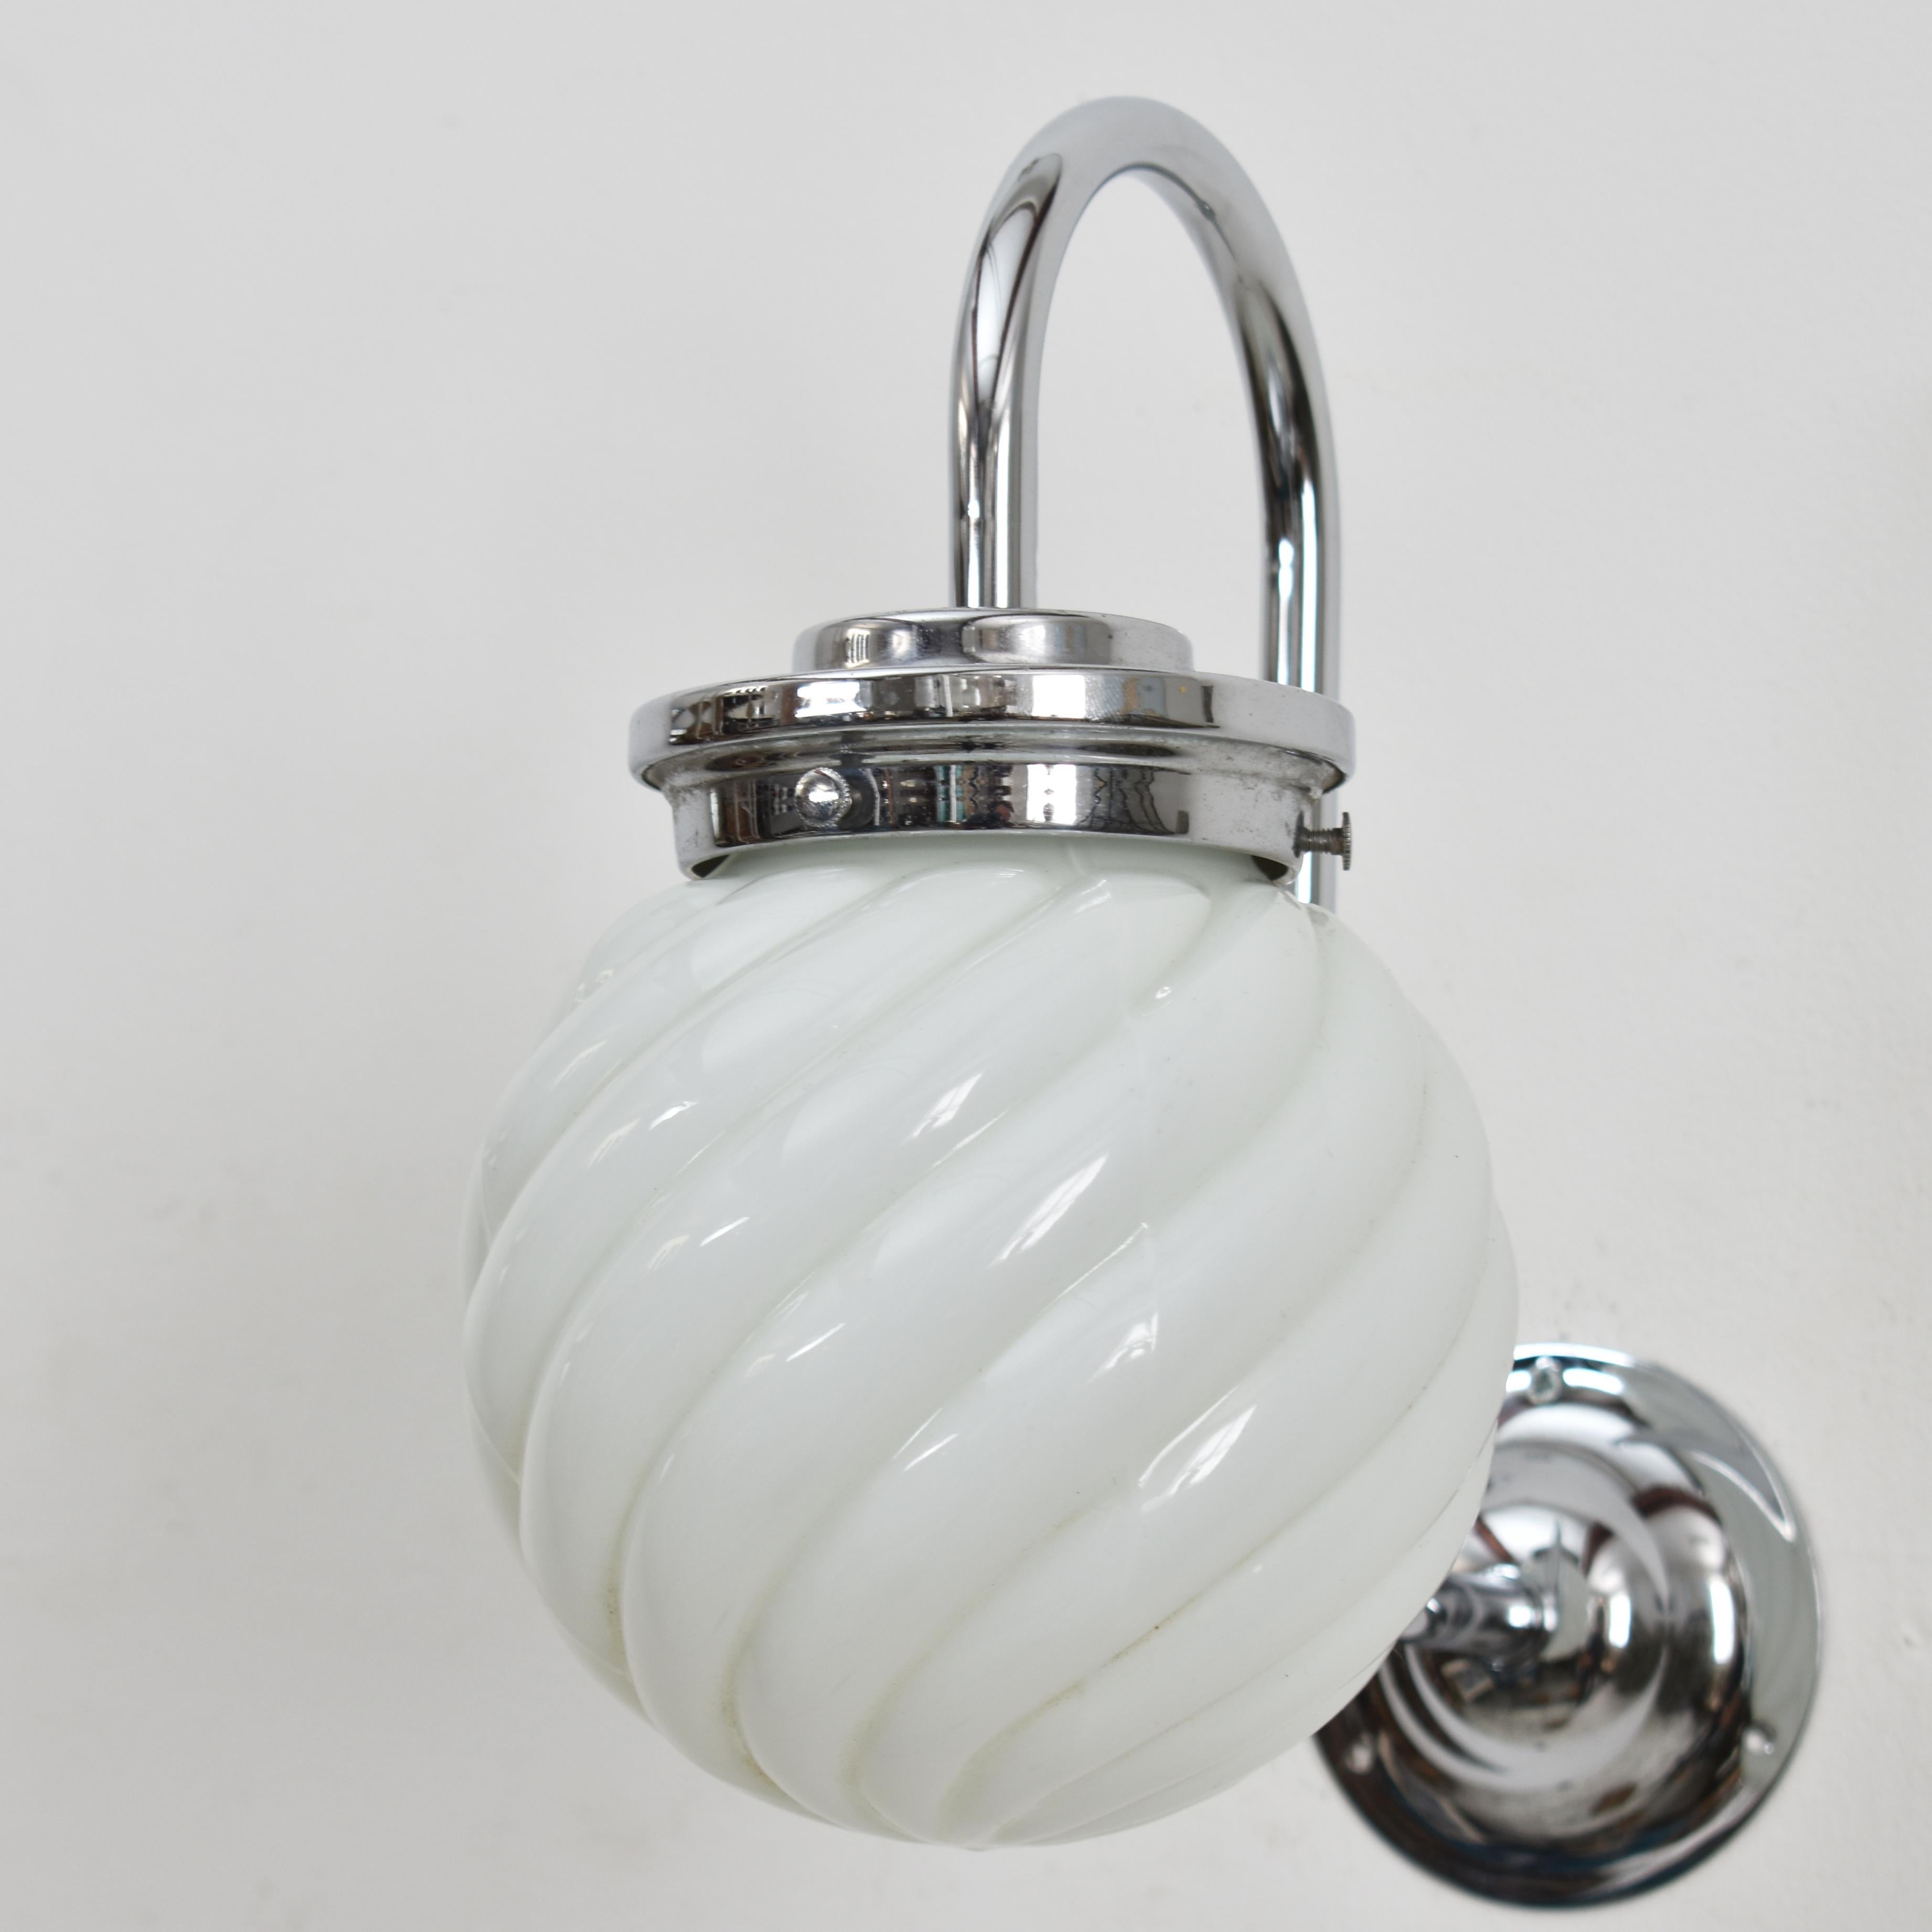 Pair of Antique Opaline Wall Lights

A pair opaline wall lights with a chrome swan neck wall bracket and gallery. The opaline glass shades have an unique swirl shape to them.

Dimensions:
Shade height and diameter: 14cm
Light height including neck: